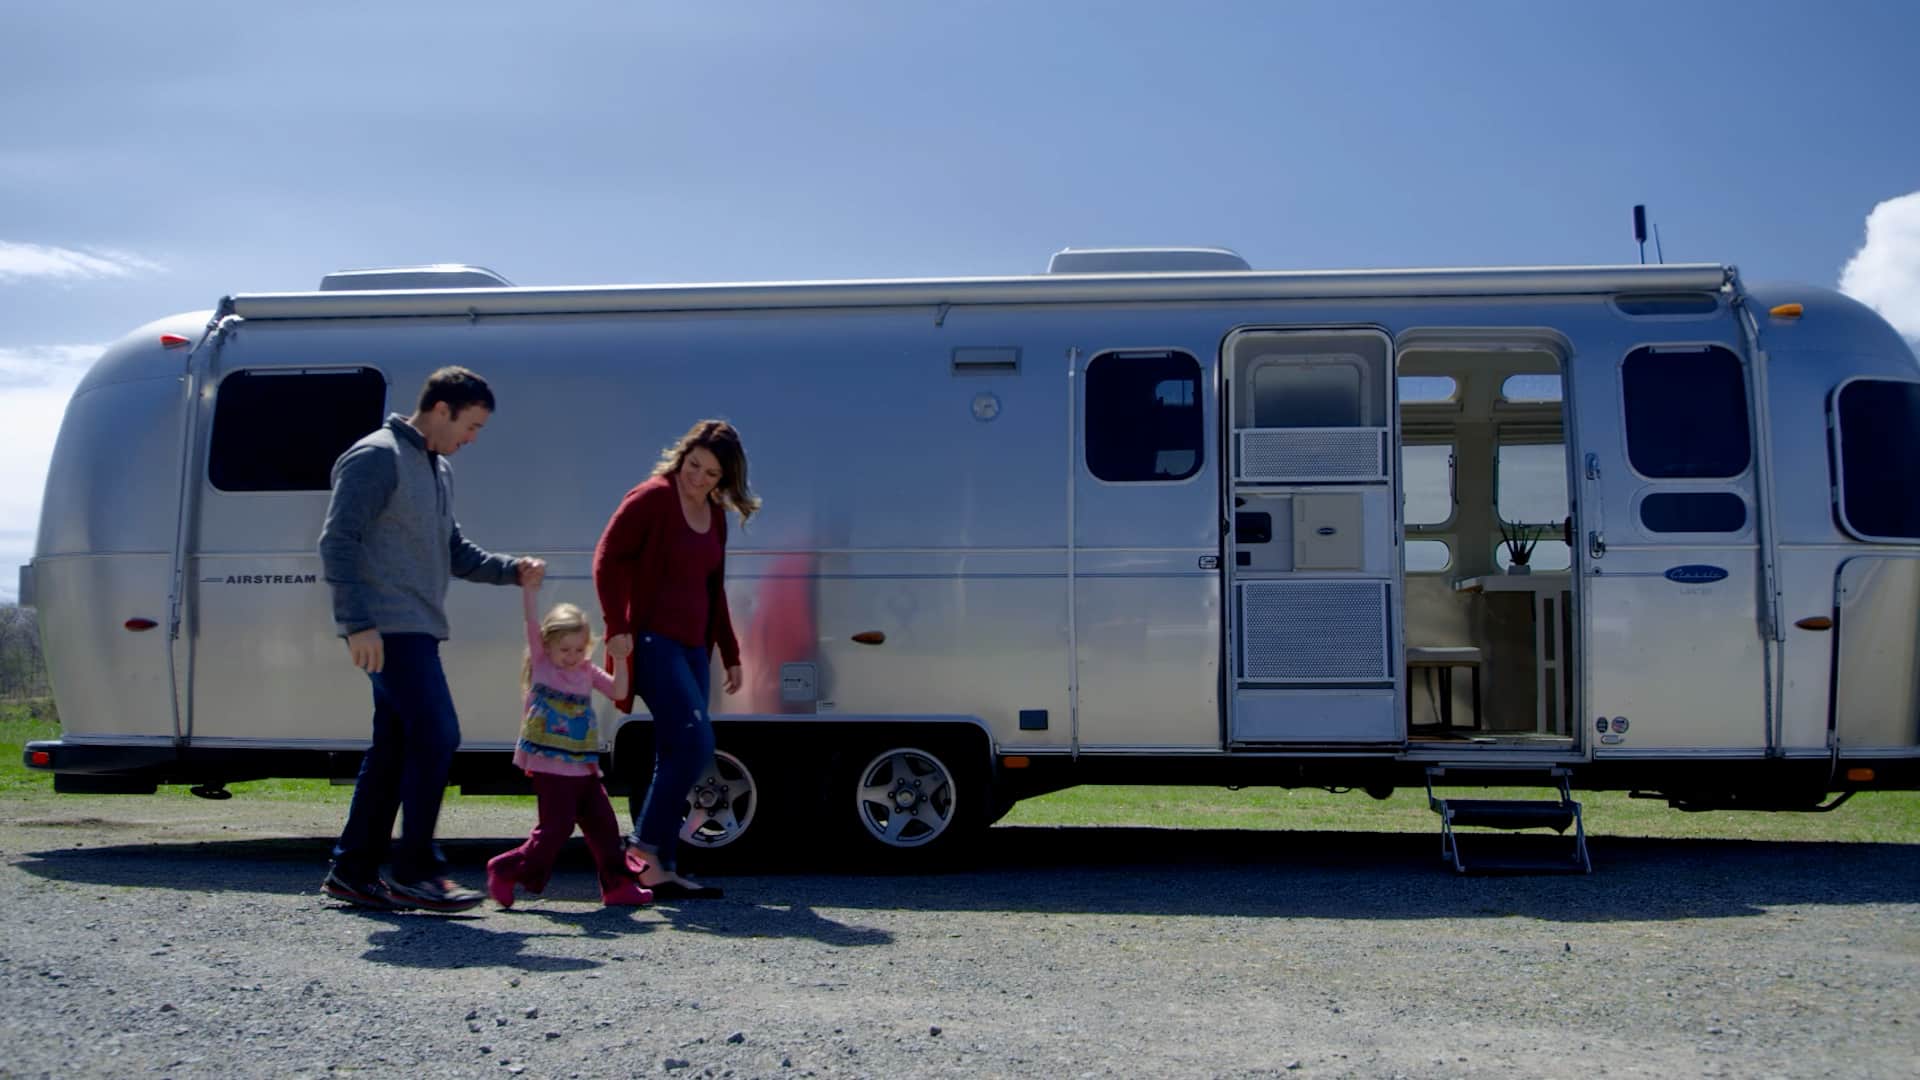 Less Junk More Journey holding hands with their child outside of their Airstream